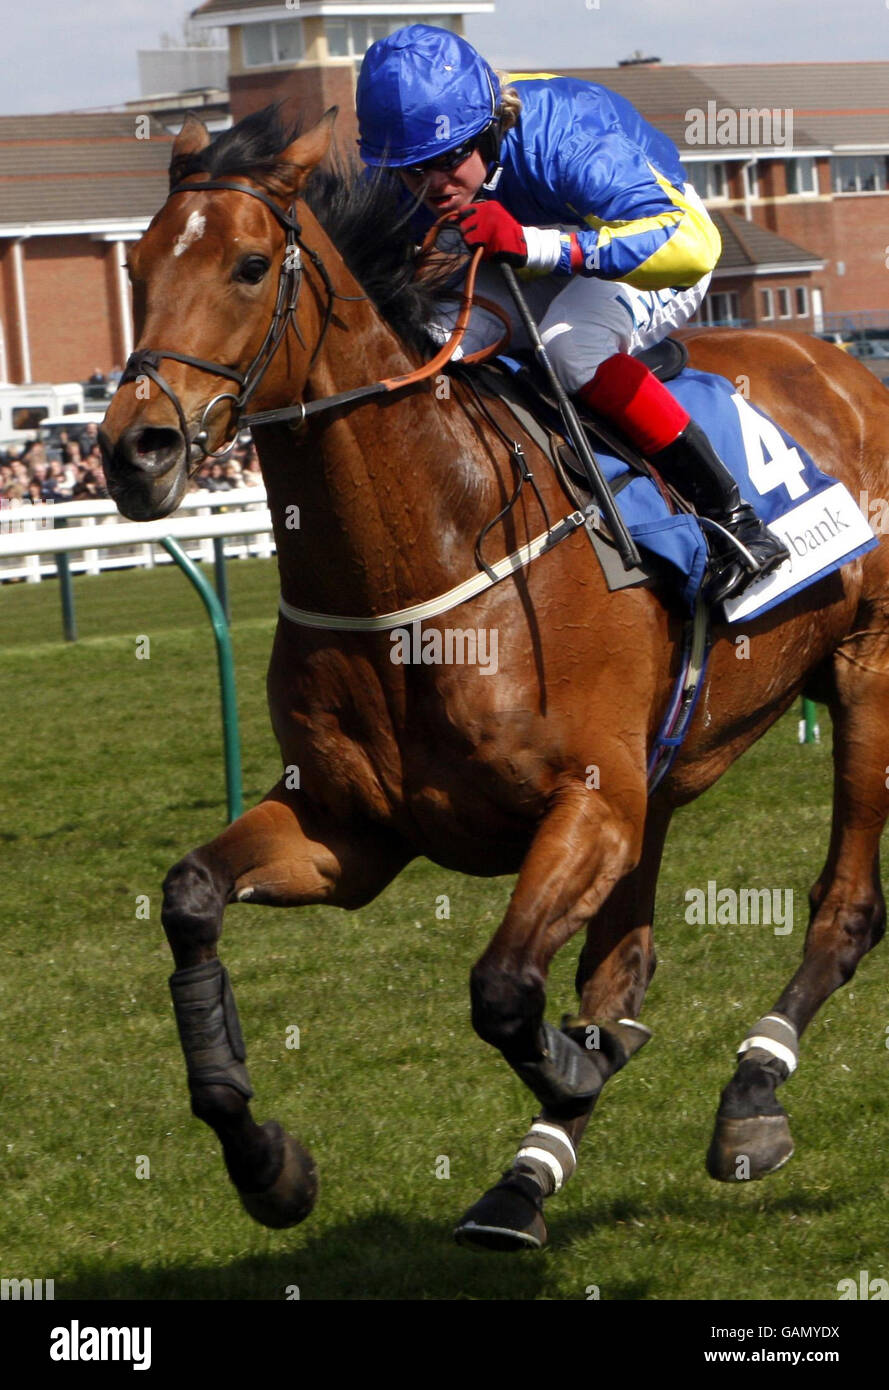 Jockey Robert Thornton riding Starzaan winner of the Ashleybank Investments Future Champion Novices' Chase during the Coral Scottish Grand National Festival at Ayr Racecourse, Ayr. Stock Photo